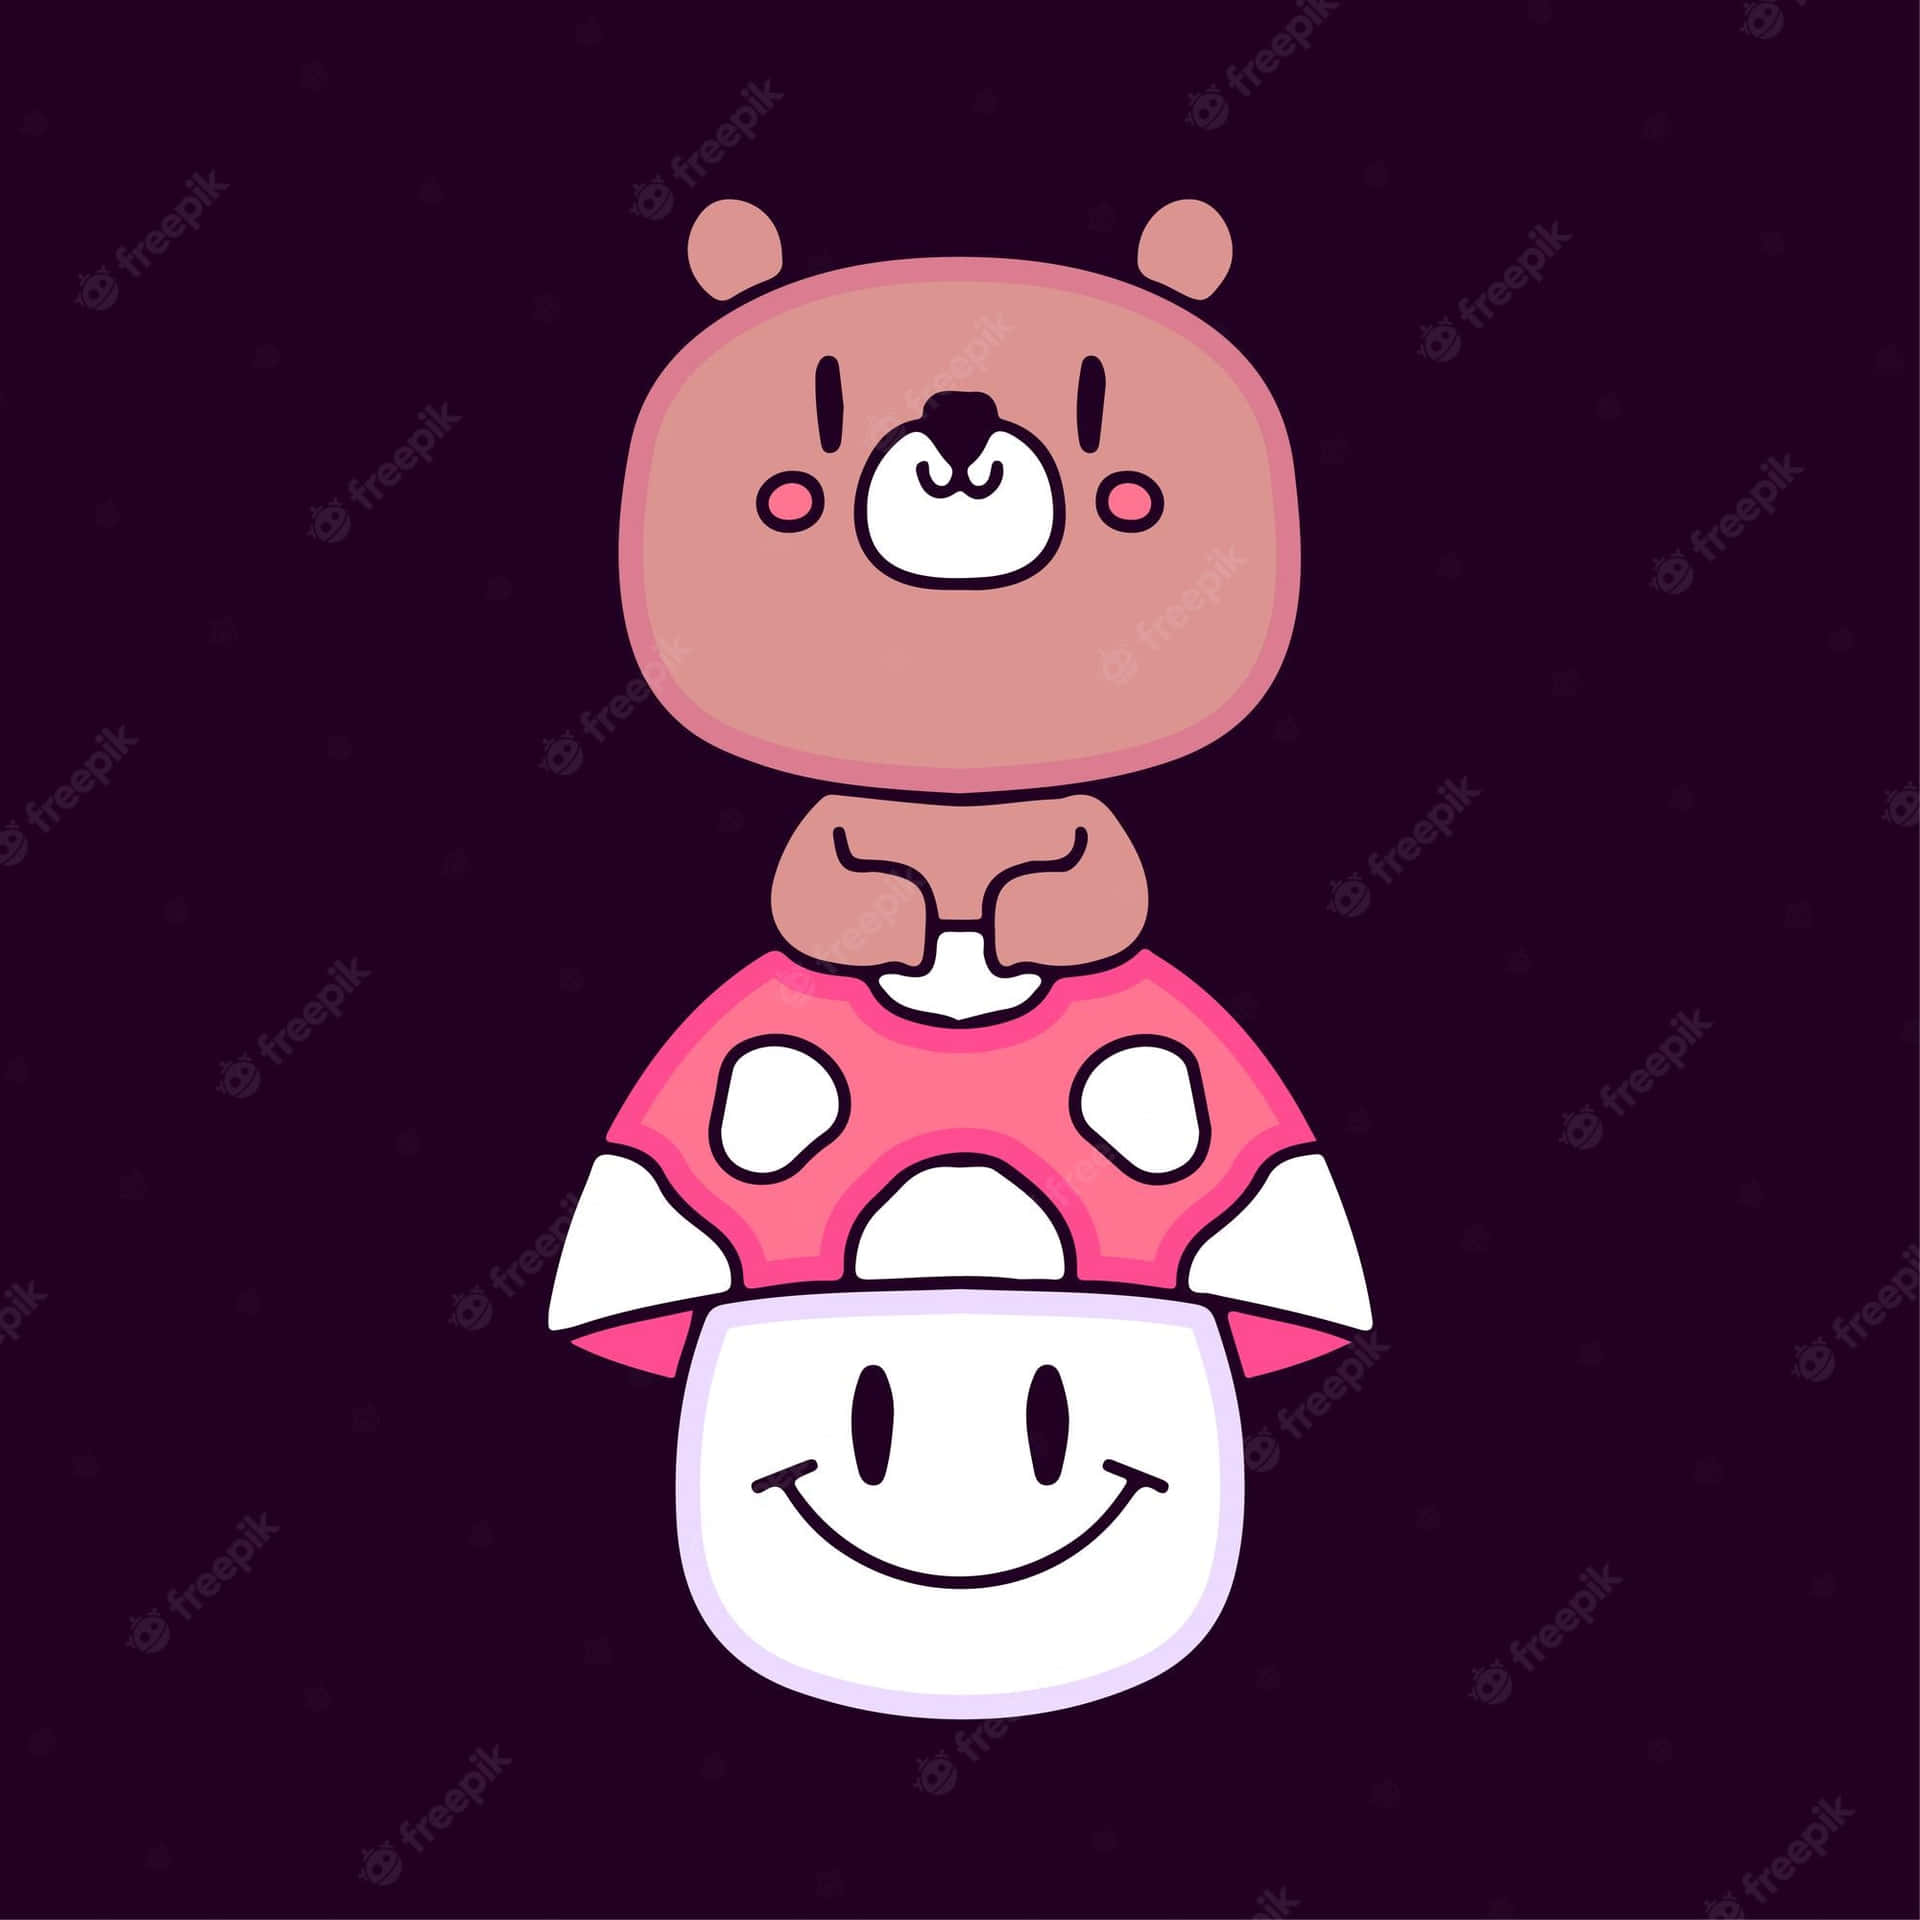 Add Some Fun To Your Life With Gloomy Bear Wallpaper